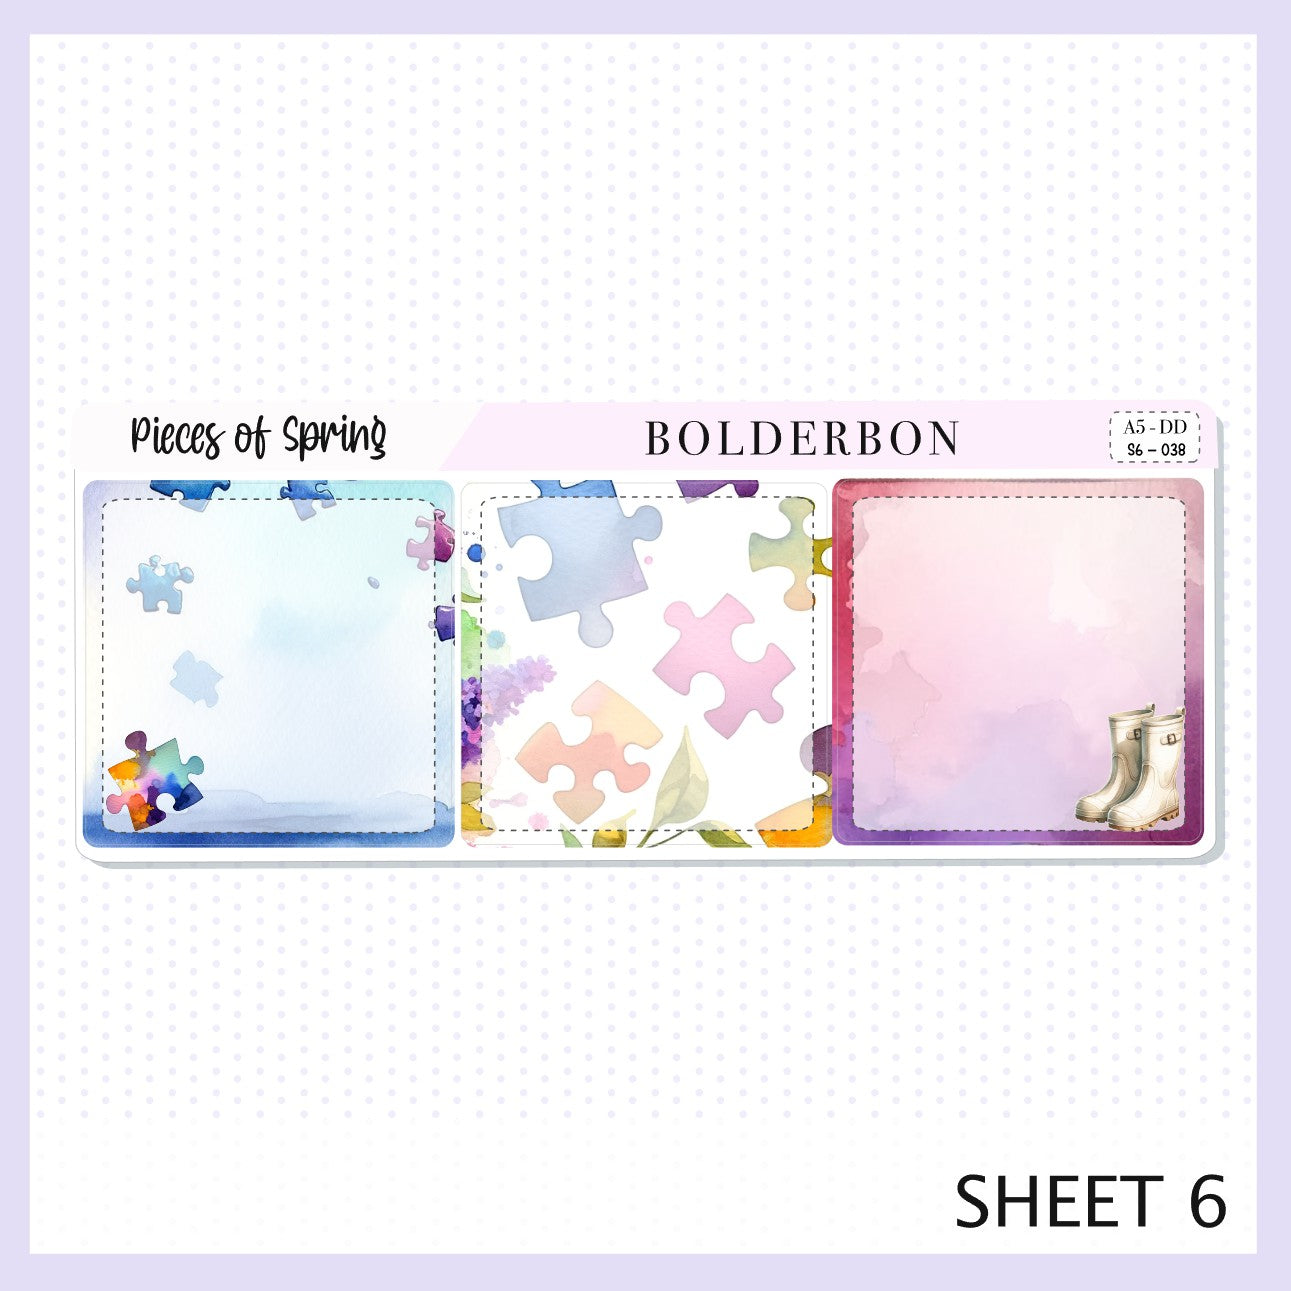 PIECES OF SPRING|| A5 Daily Duo Planner Sticker Kit